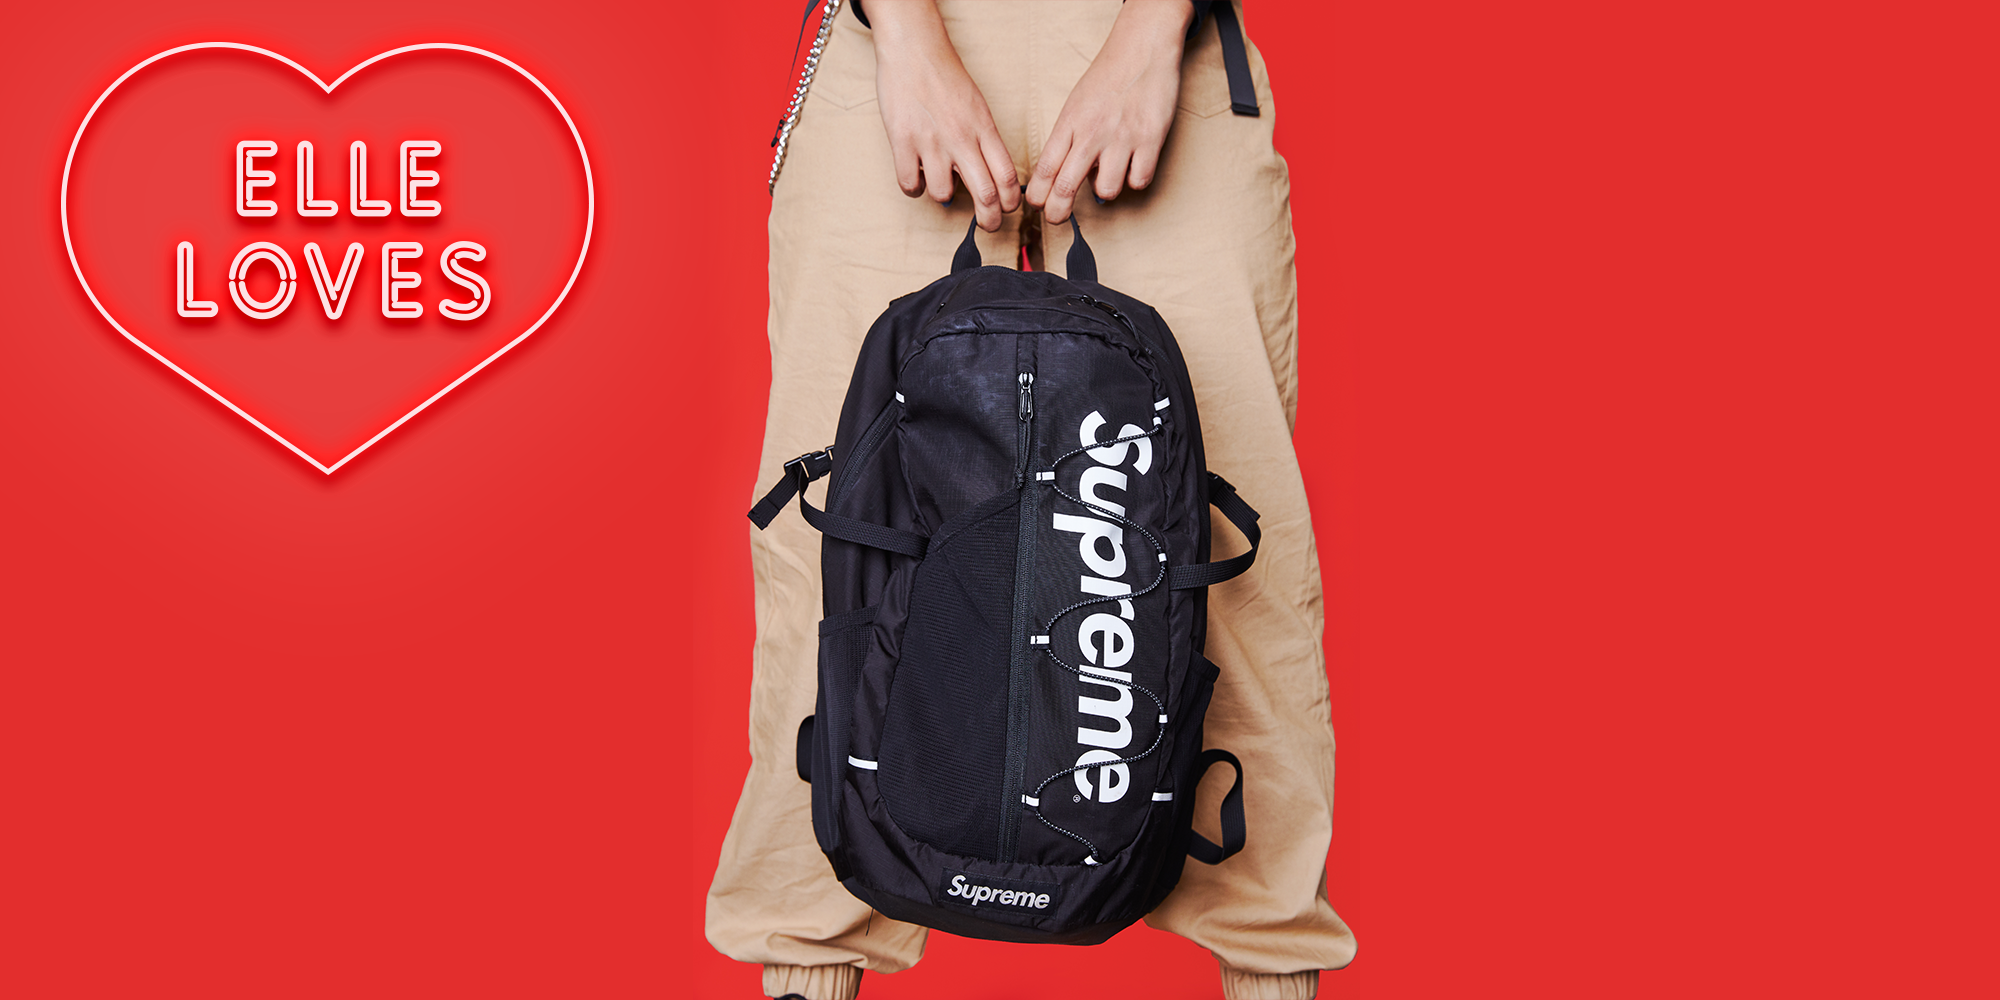 874f47a1bc99f142cb05c9bfe8133cd2--supreme-backpack-denim-backpack | Mens  fashion trends, Sneakers men fashion, Sneakers fashion